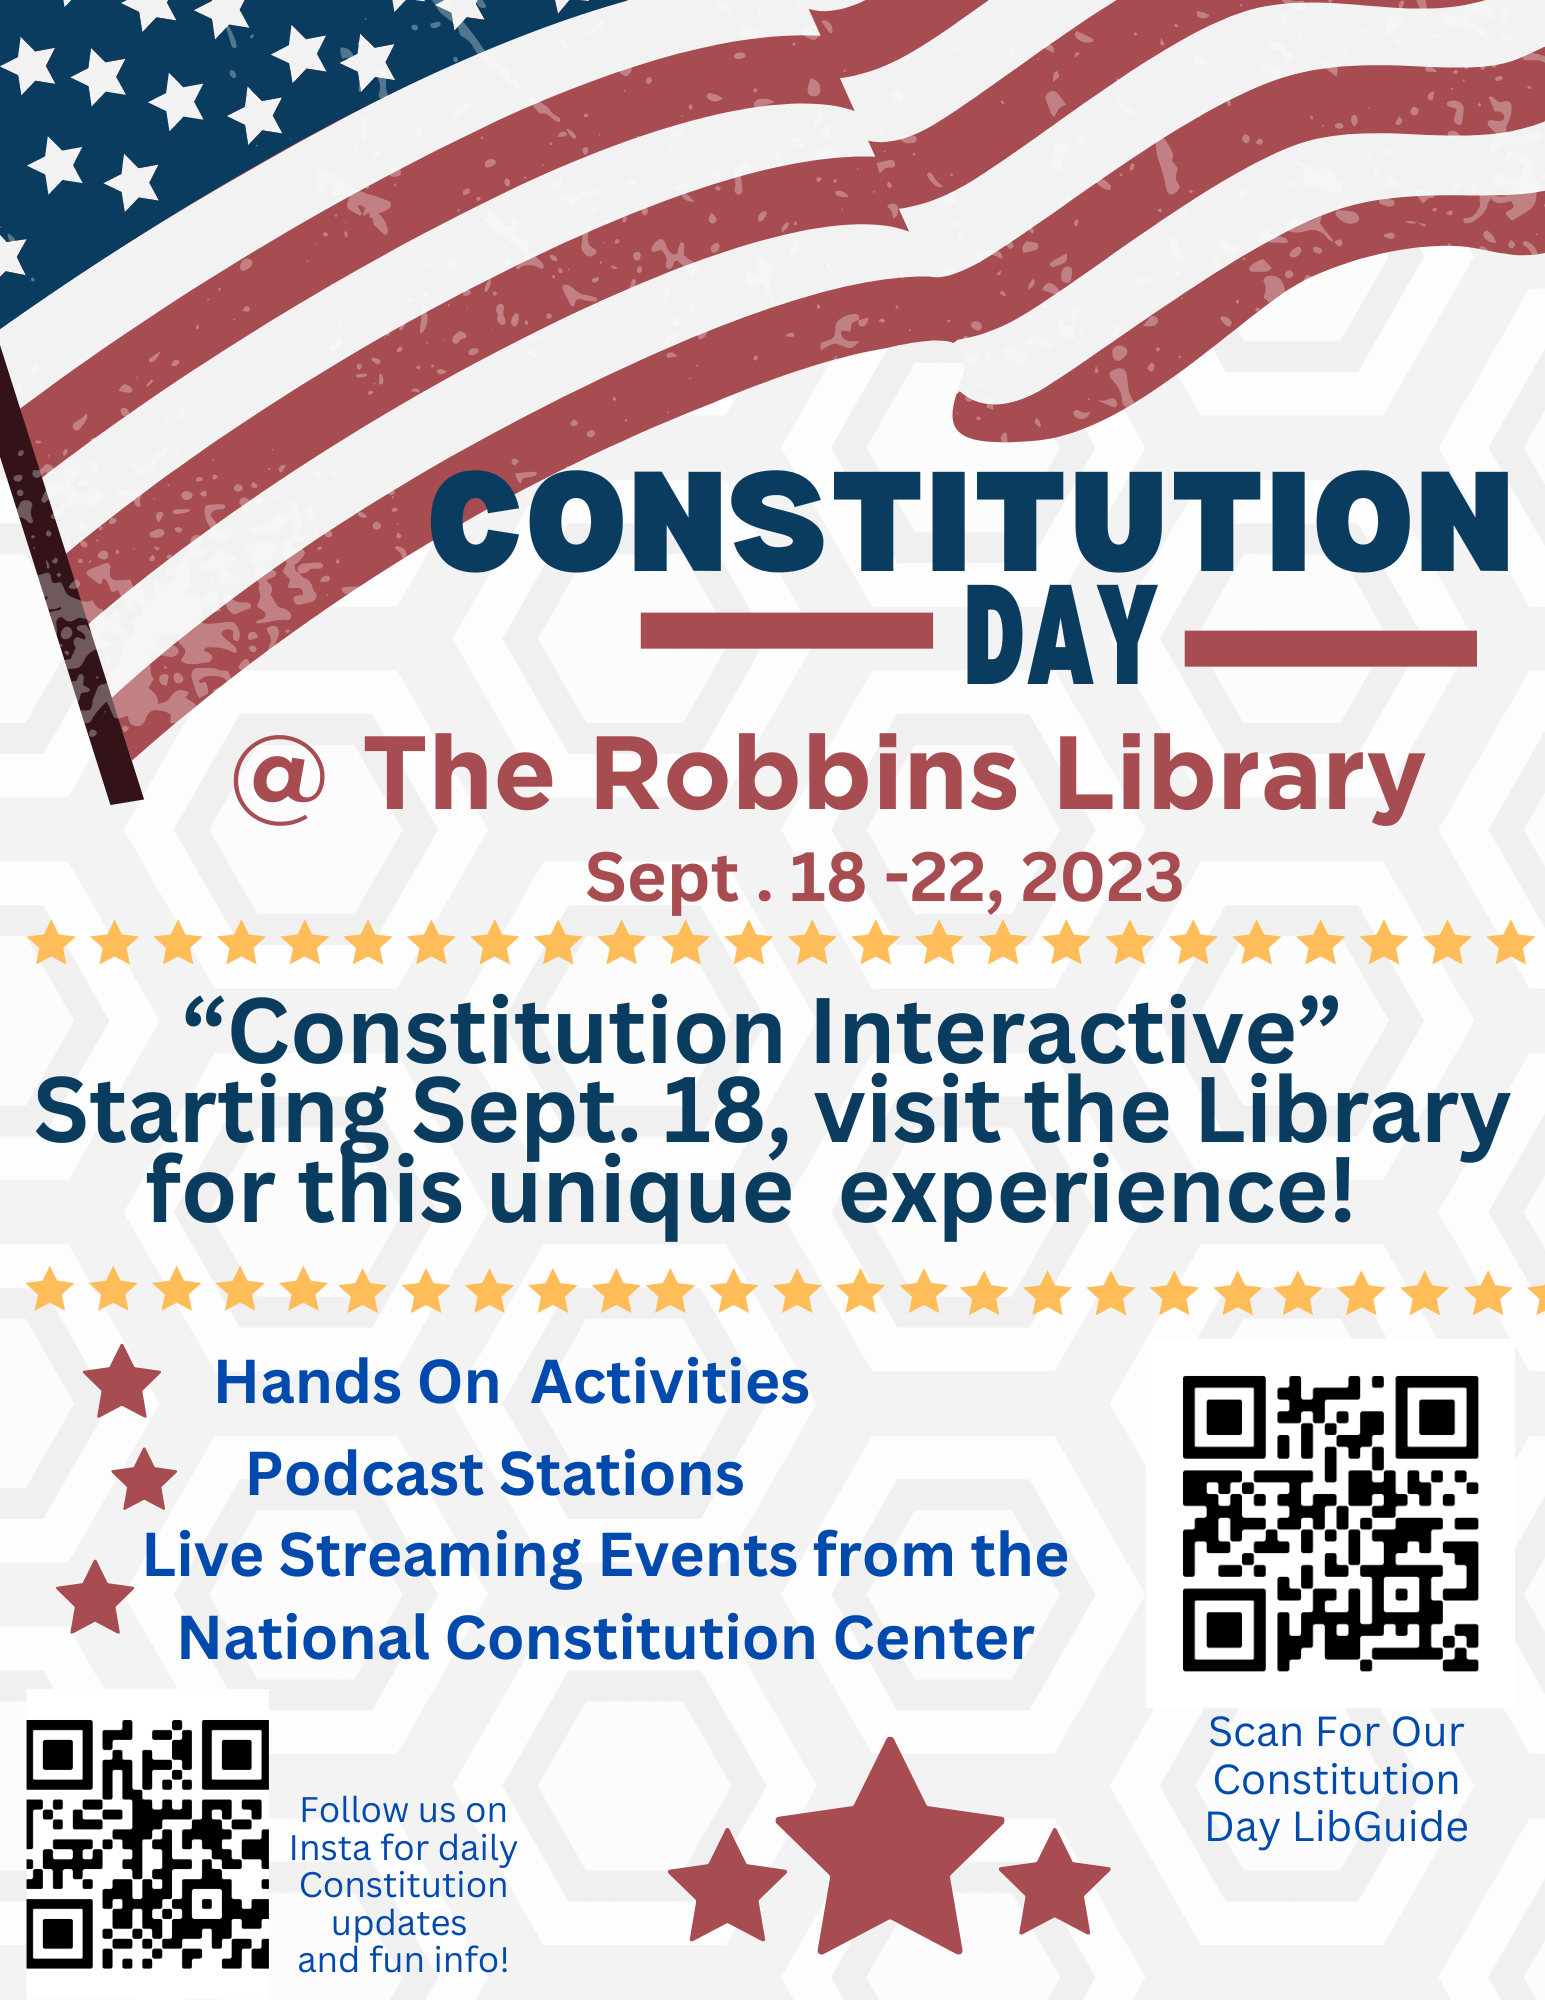 Constitution Day event flyer with description of a weeklong event in the Robbins Library